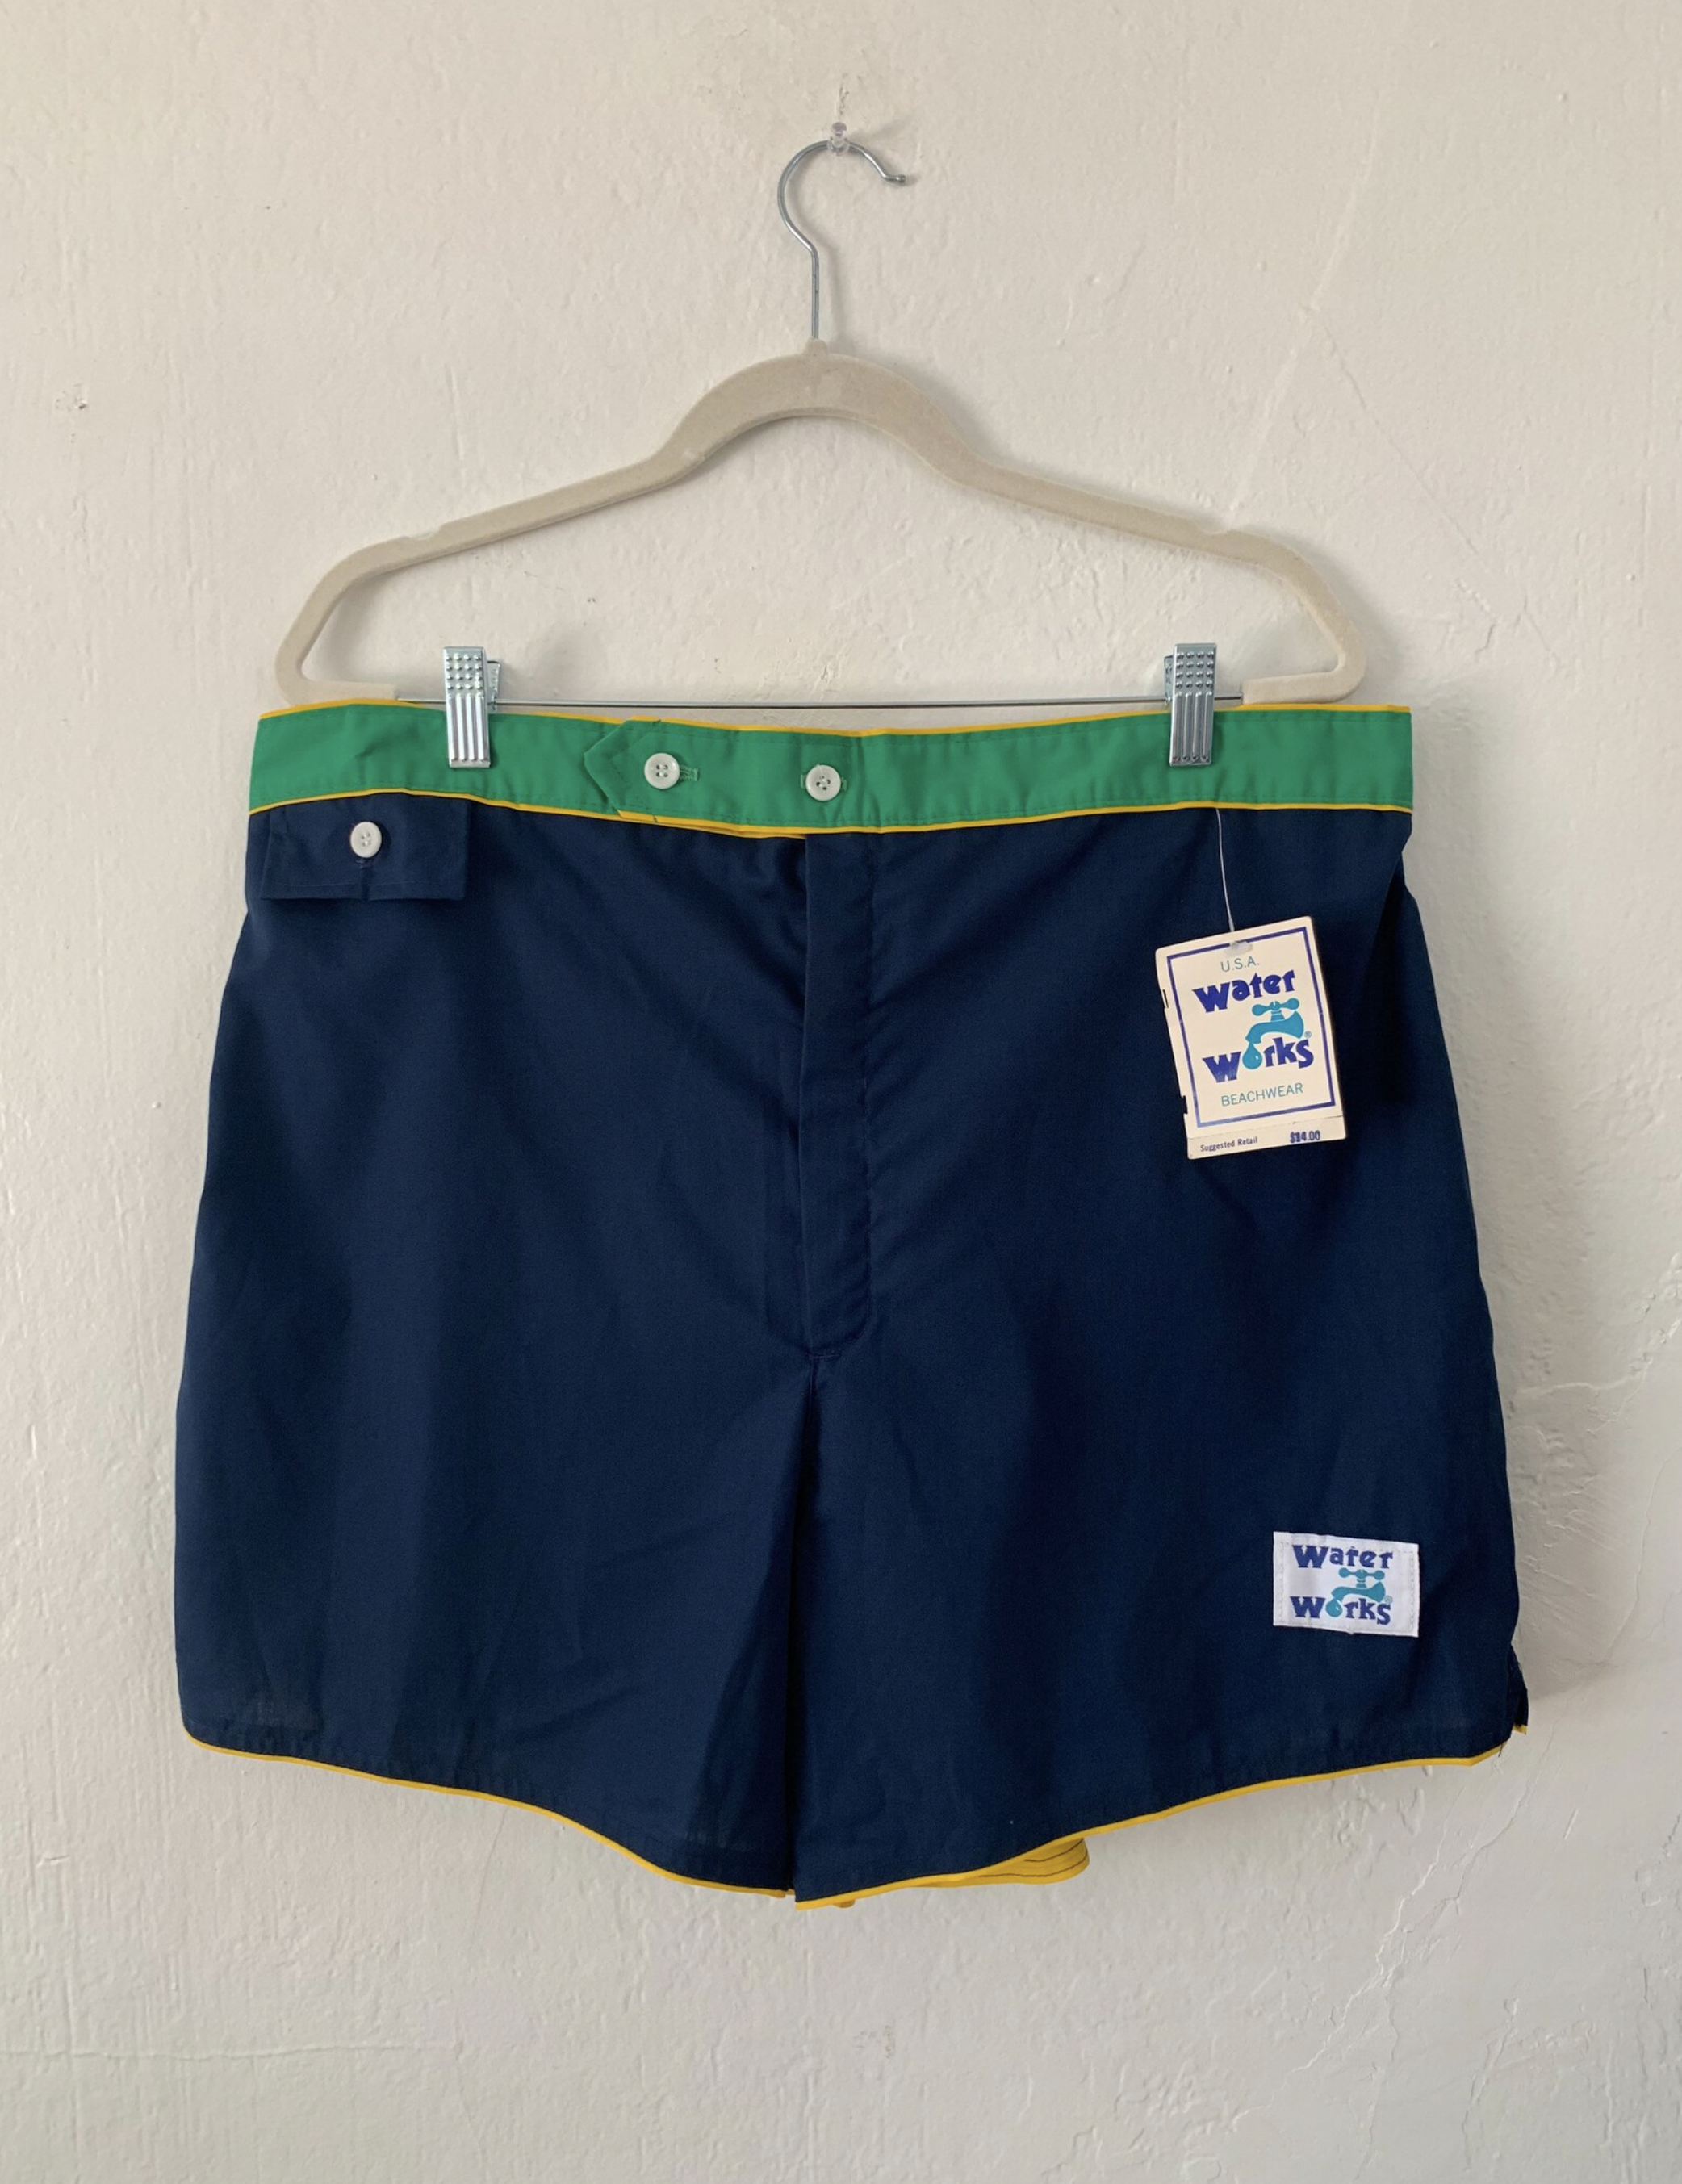 Water Works boardshorts (1970s)